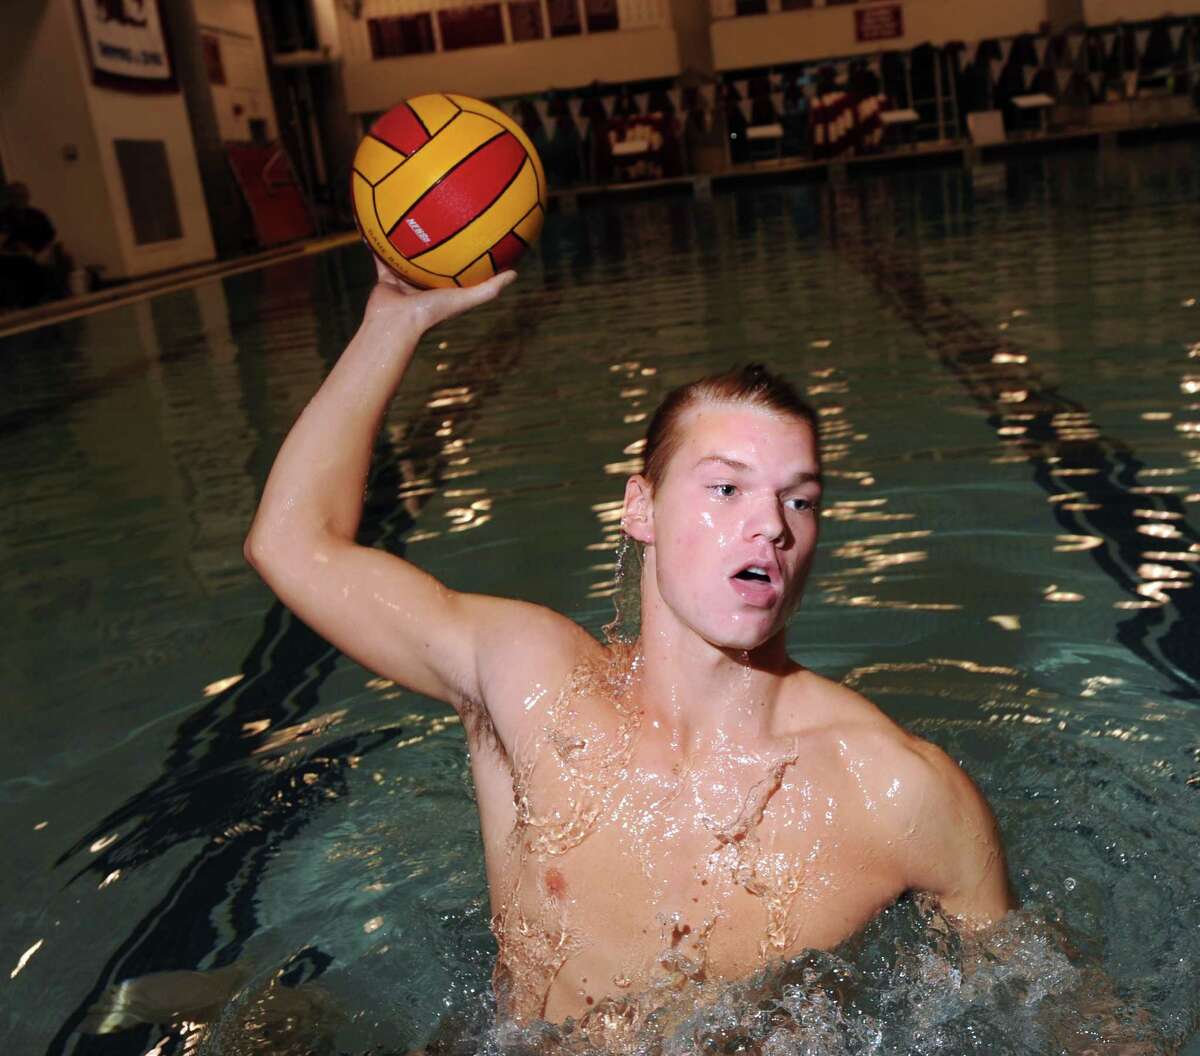 Greenwich HIgh School water polo captain Will Klingner during practice at the school, Tuesday, Sept. 18, 2012.